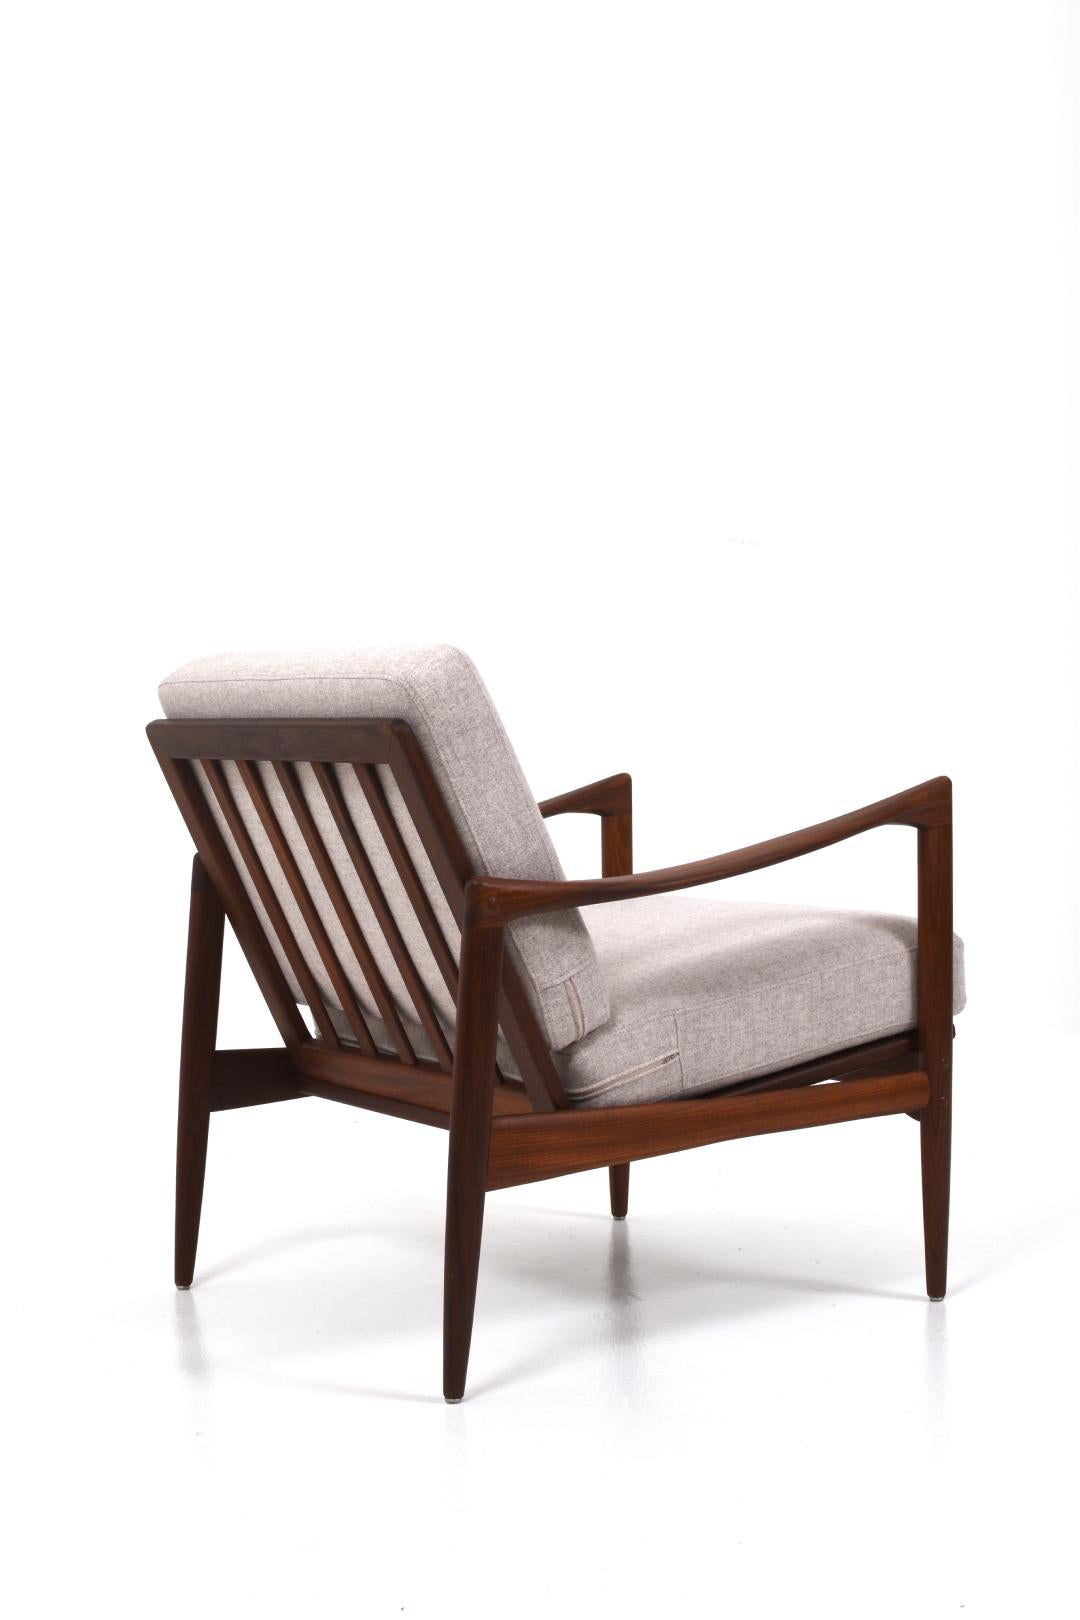 Kandidaten is a very elegant armchair design by Ib Kofod Larsen.
The armchair is from the 60s, but in very good condition as we have upholstered it. We have sanded and oiled the teak frame. There are new Fagas band at the bottom which gives